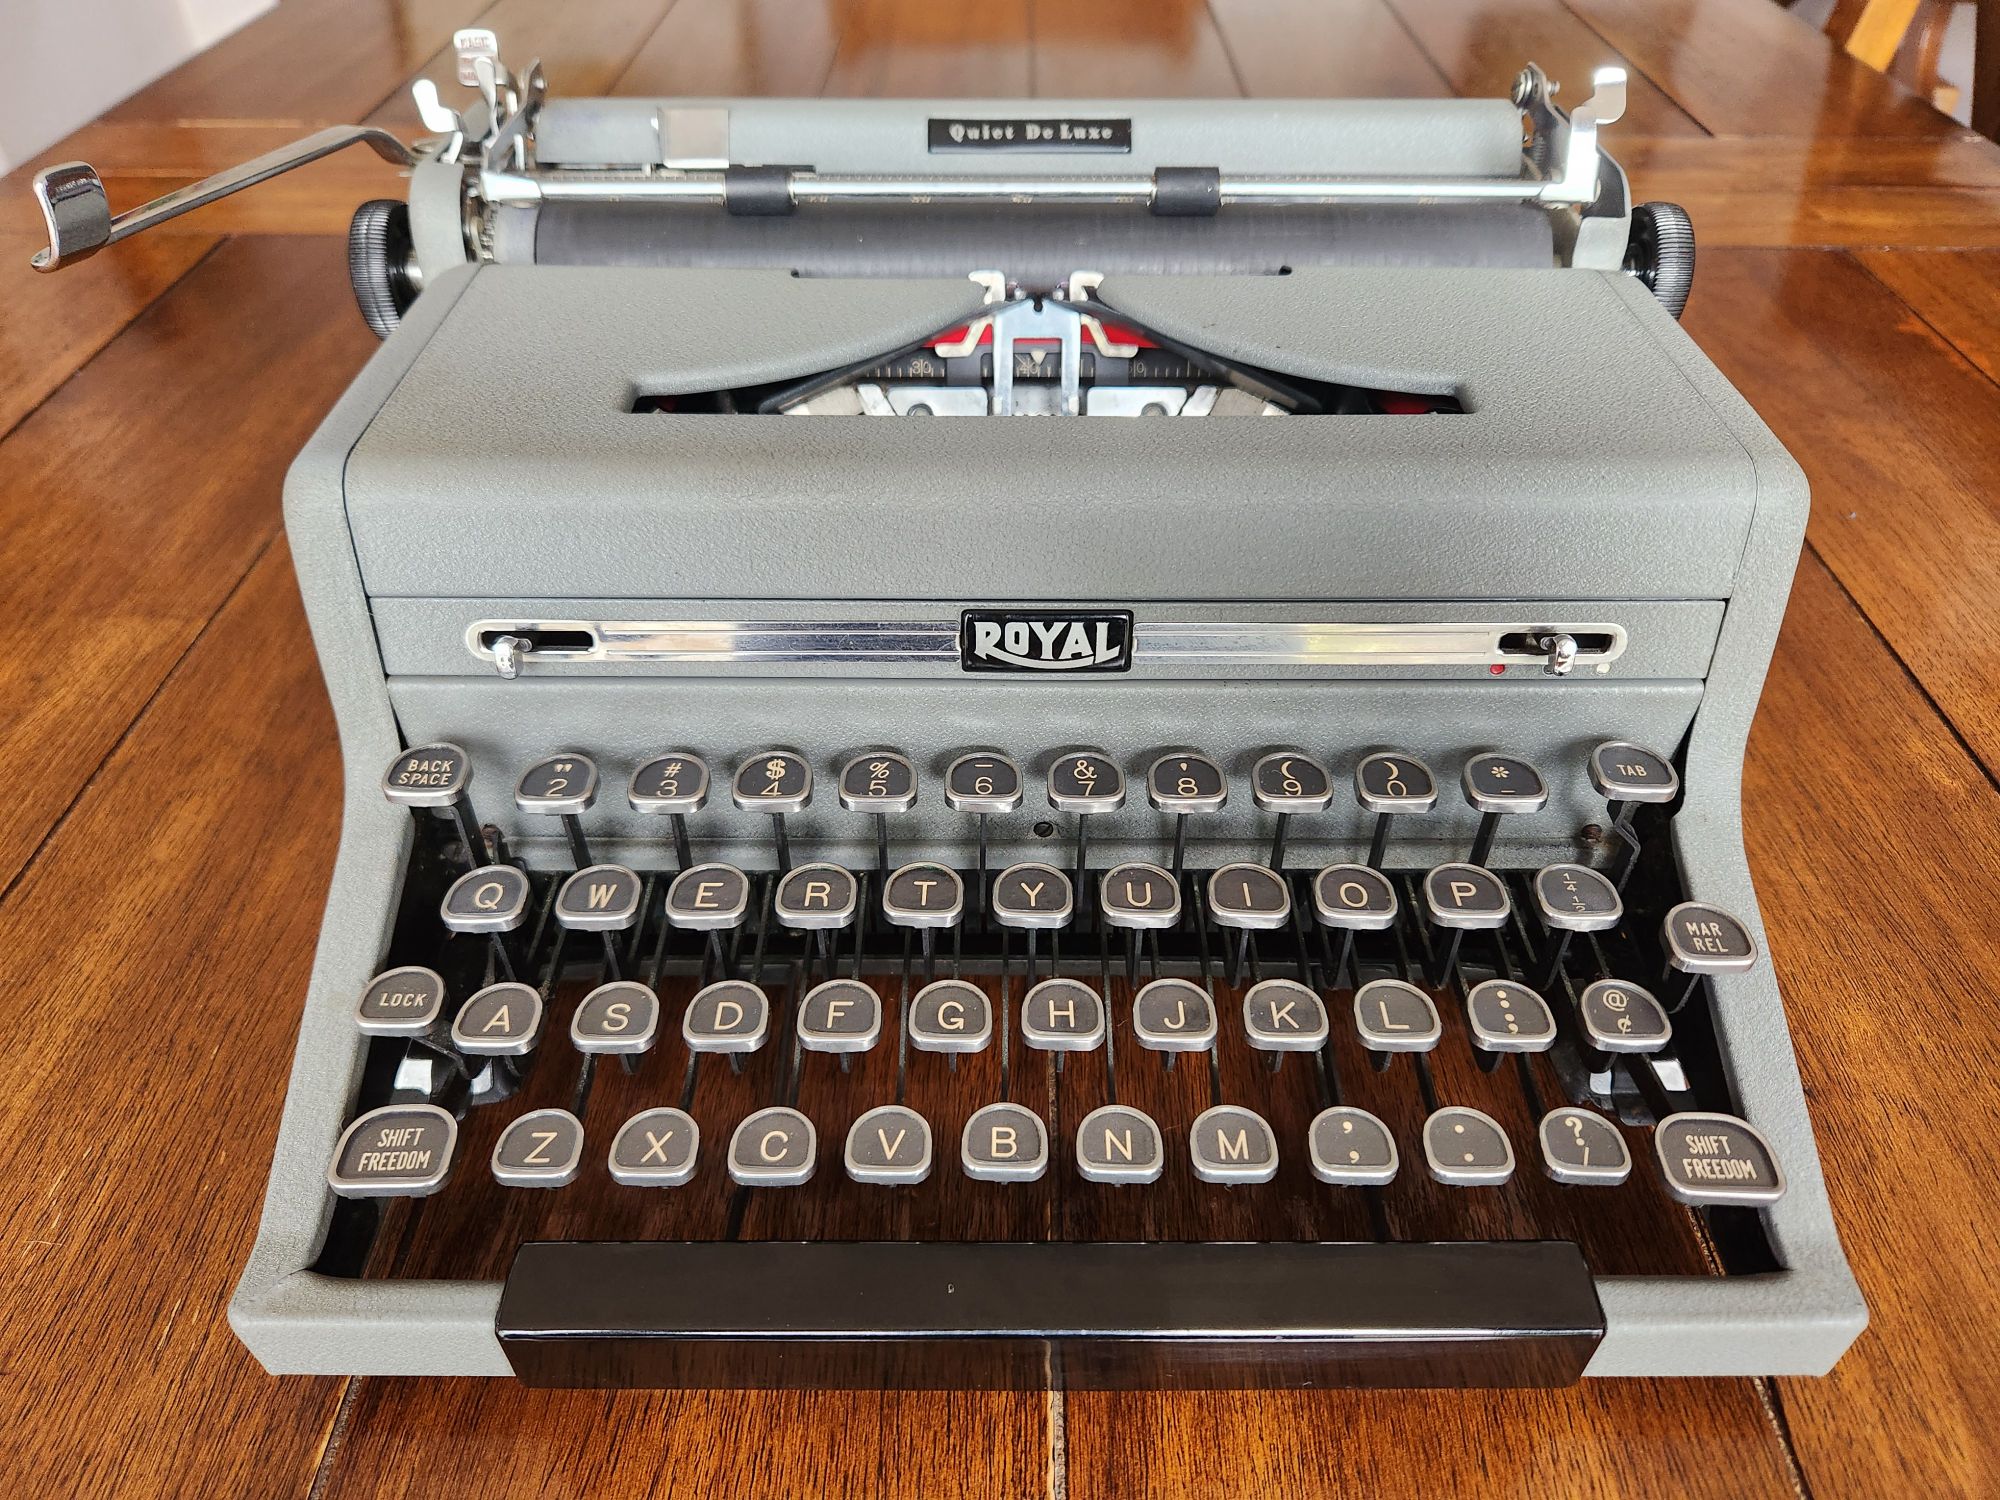 Front view down onto a gray crinkle painted Royal Quiet De Luxe with black glass keys and a wide black space bar which overlays the metal frame of the front of the machine. The typewriter sits on a polished wooden table which provides a stark natural contrast to the industrial nature of the typewriter's esthetic.